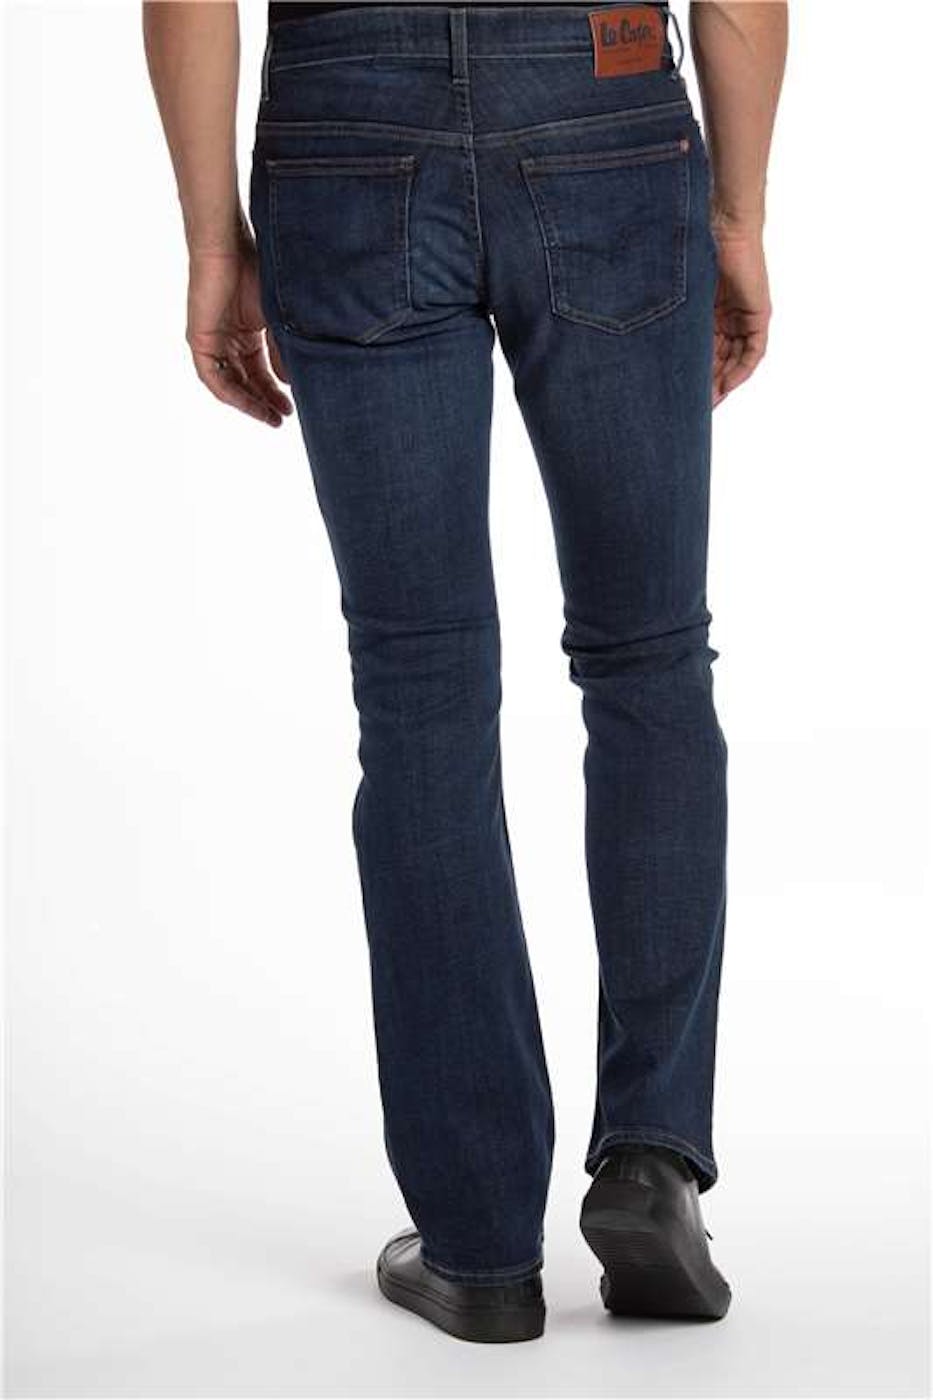 Lee Cooper - Blauwe LC134ZP bootcut jeans